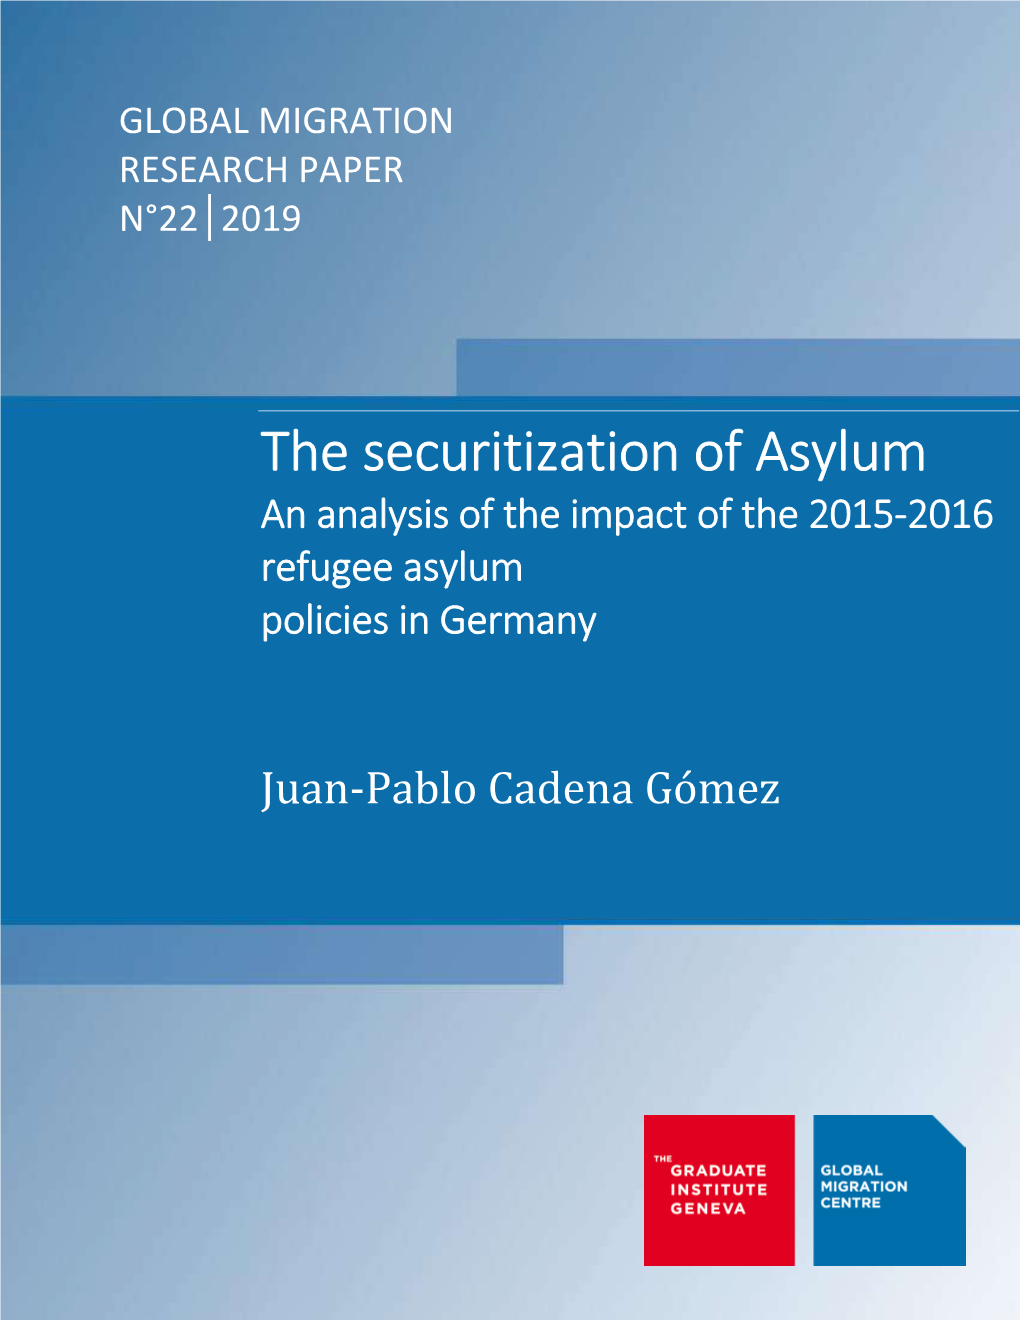 The Securitization of Asylum an Analysis of the Impact of the 2015-2016 Refugee Asylum Policies in Germany